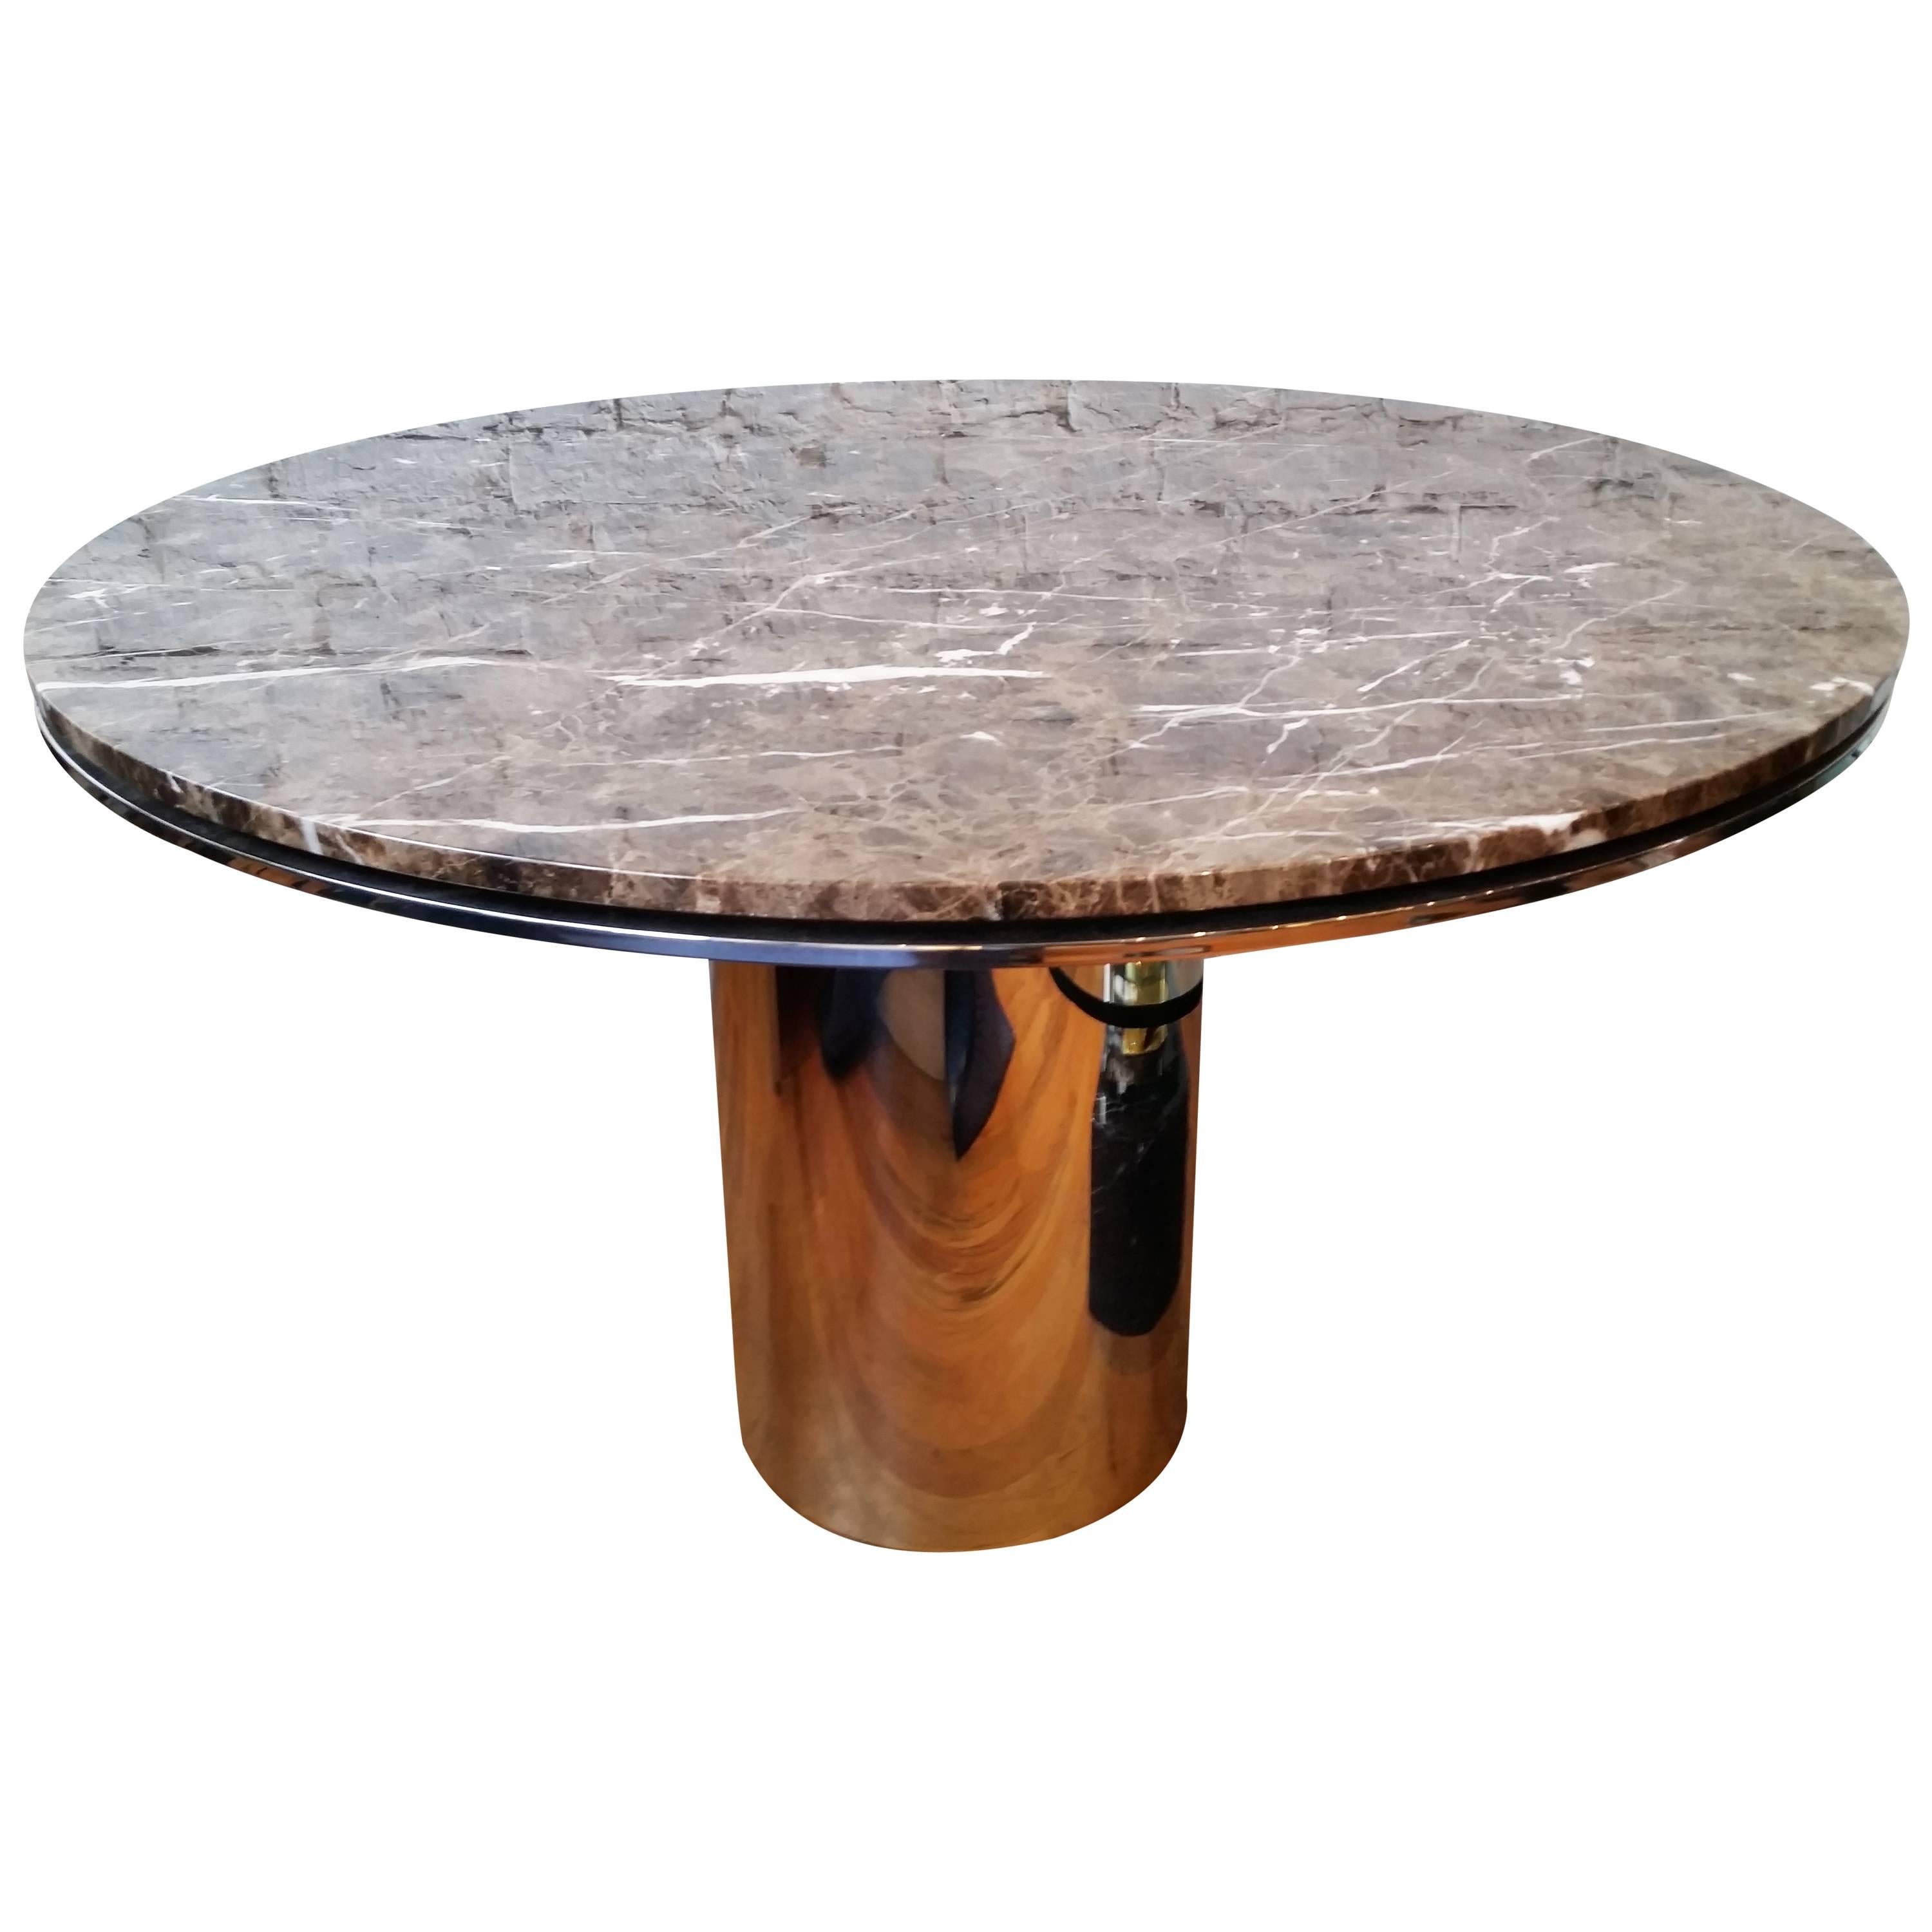 Round Chrome and Marble Dining Table by Brueton